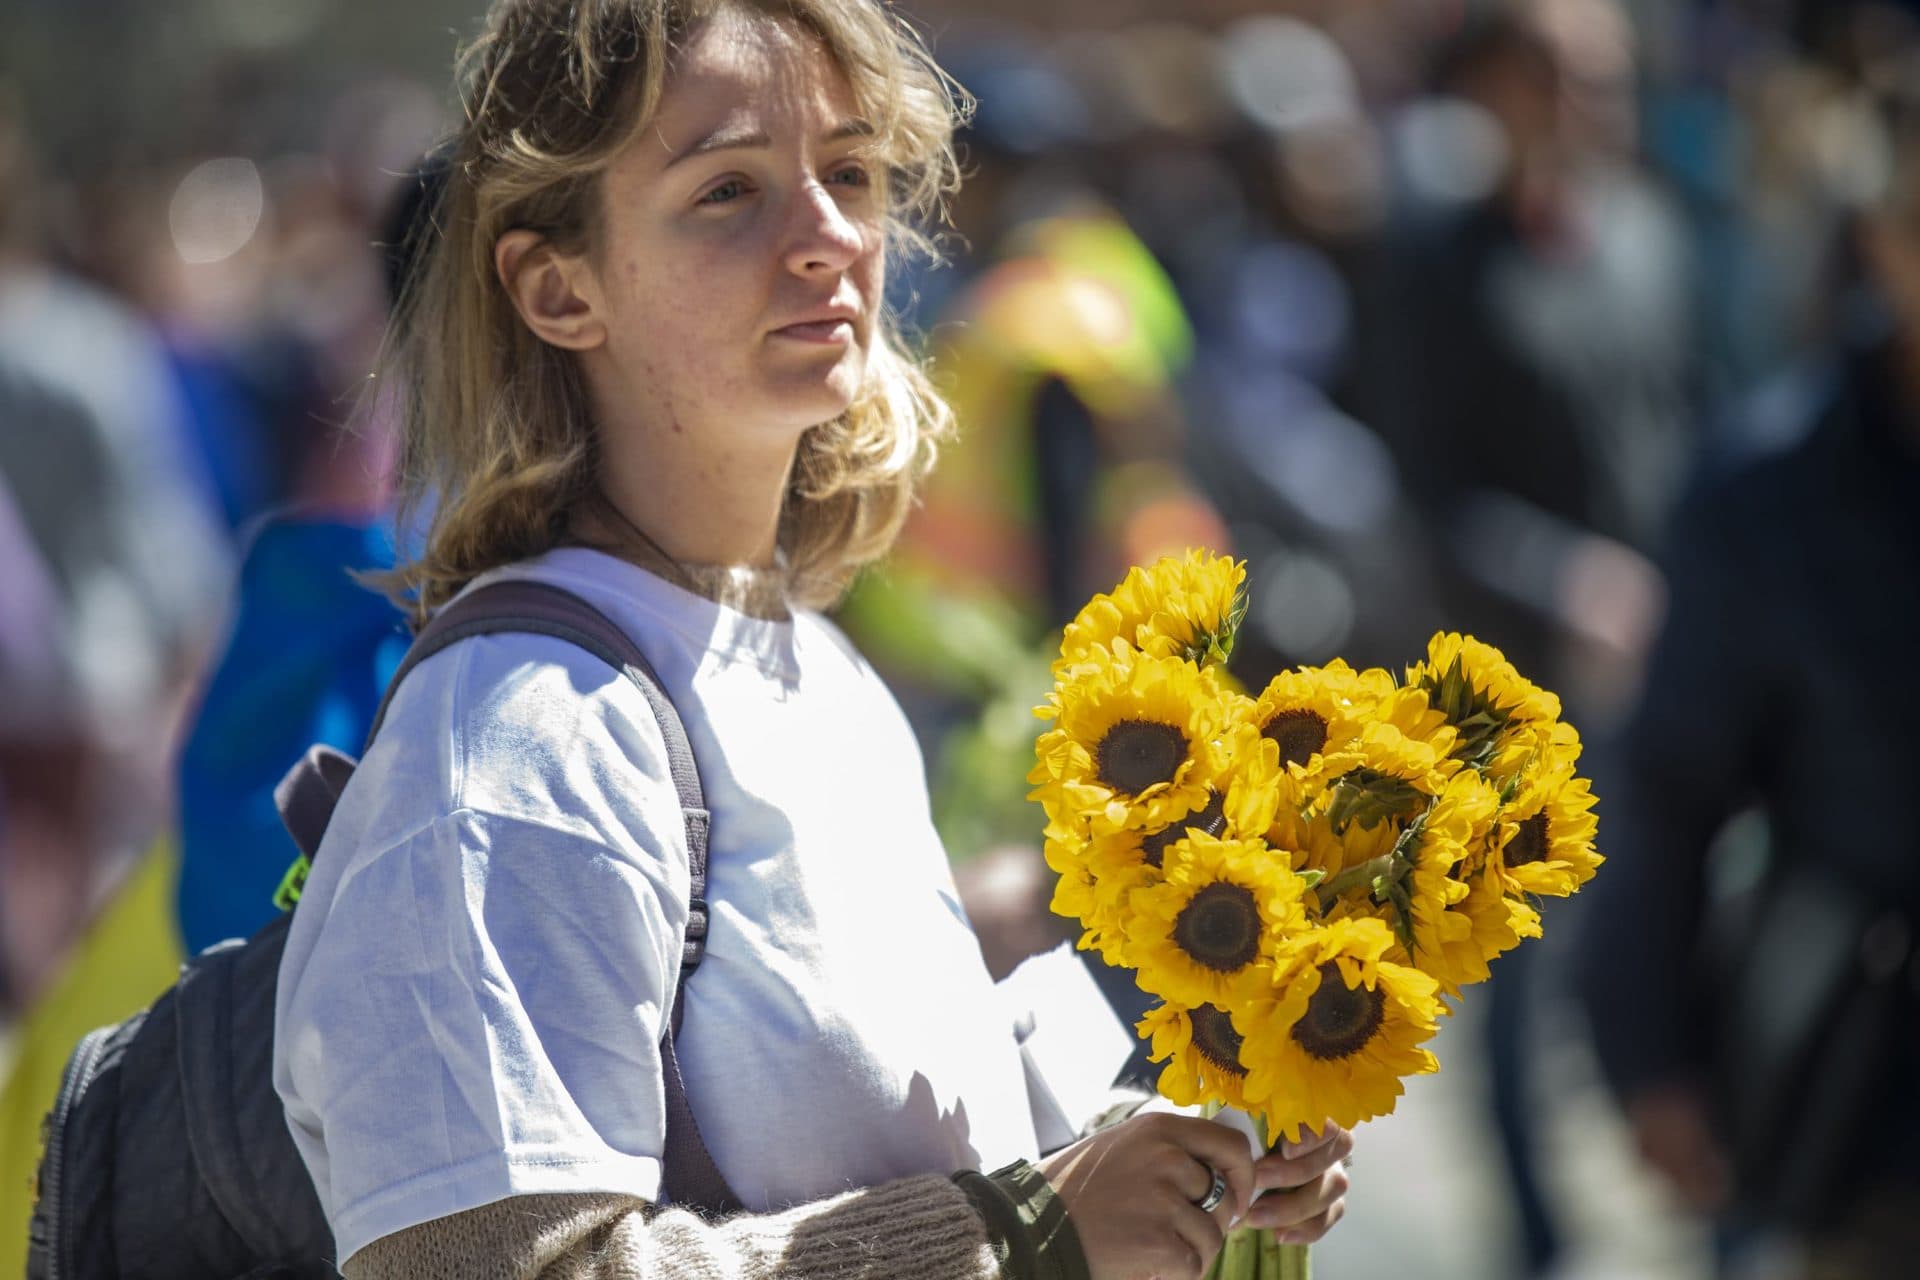 Yulia Kosheleva holds a bunch of flowers she is handing out to raise donations for the people of Ukraine. (Jesse Costa/WBUR)